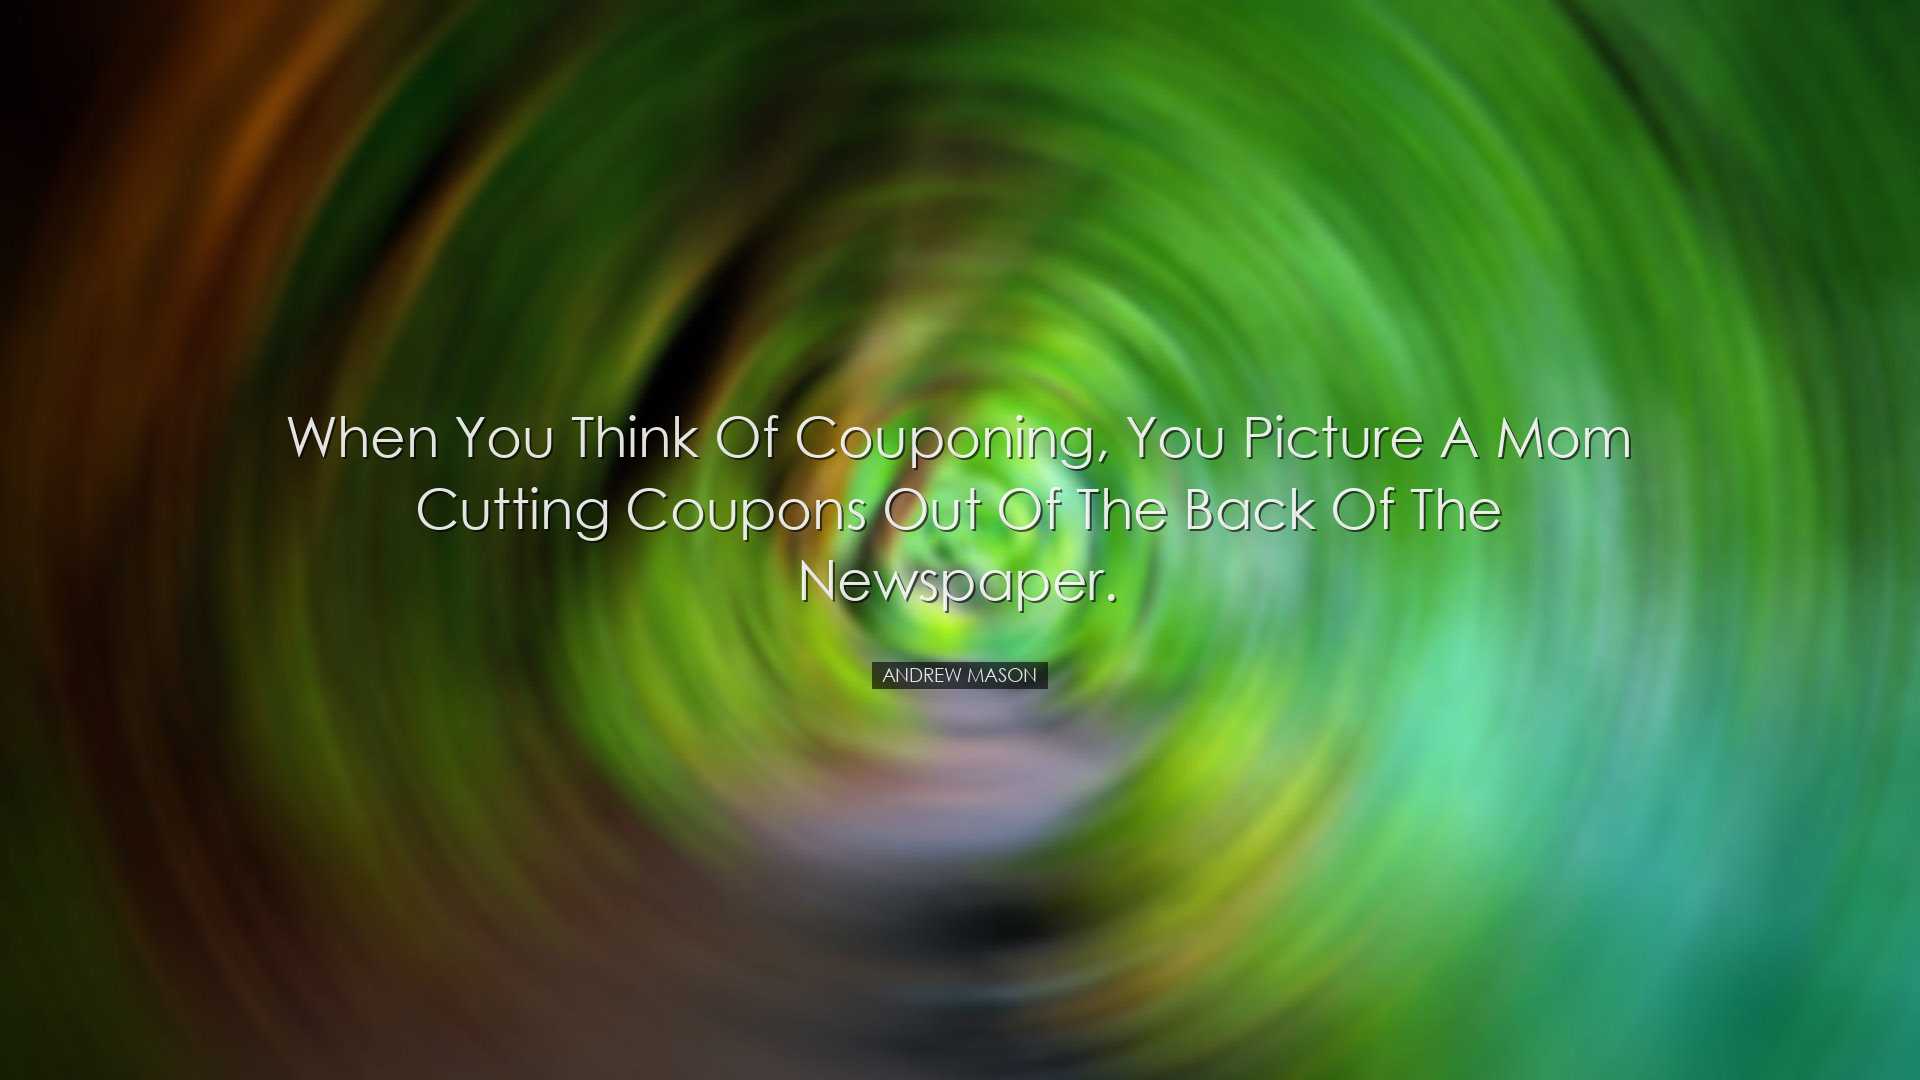 When you think of couponing, you picture a mom cutting coupons out